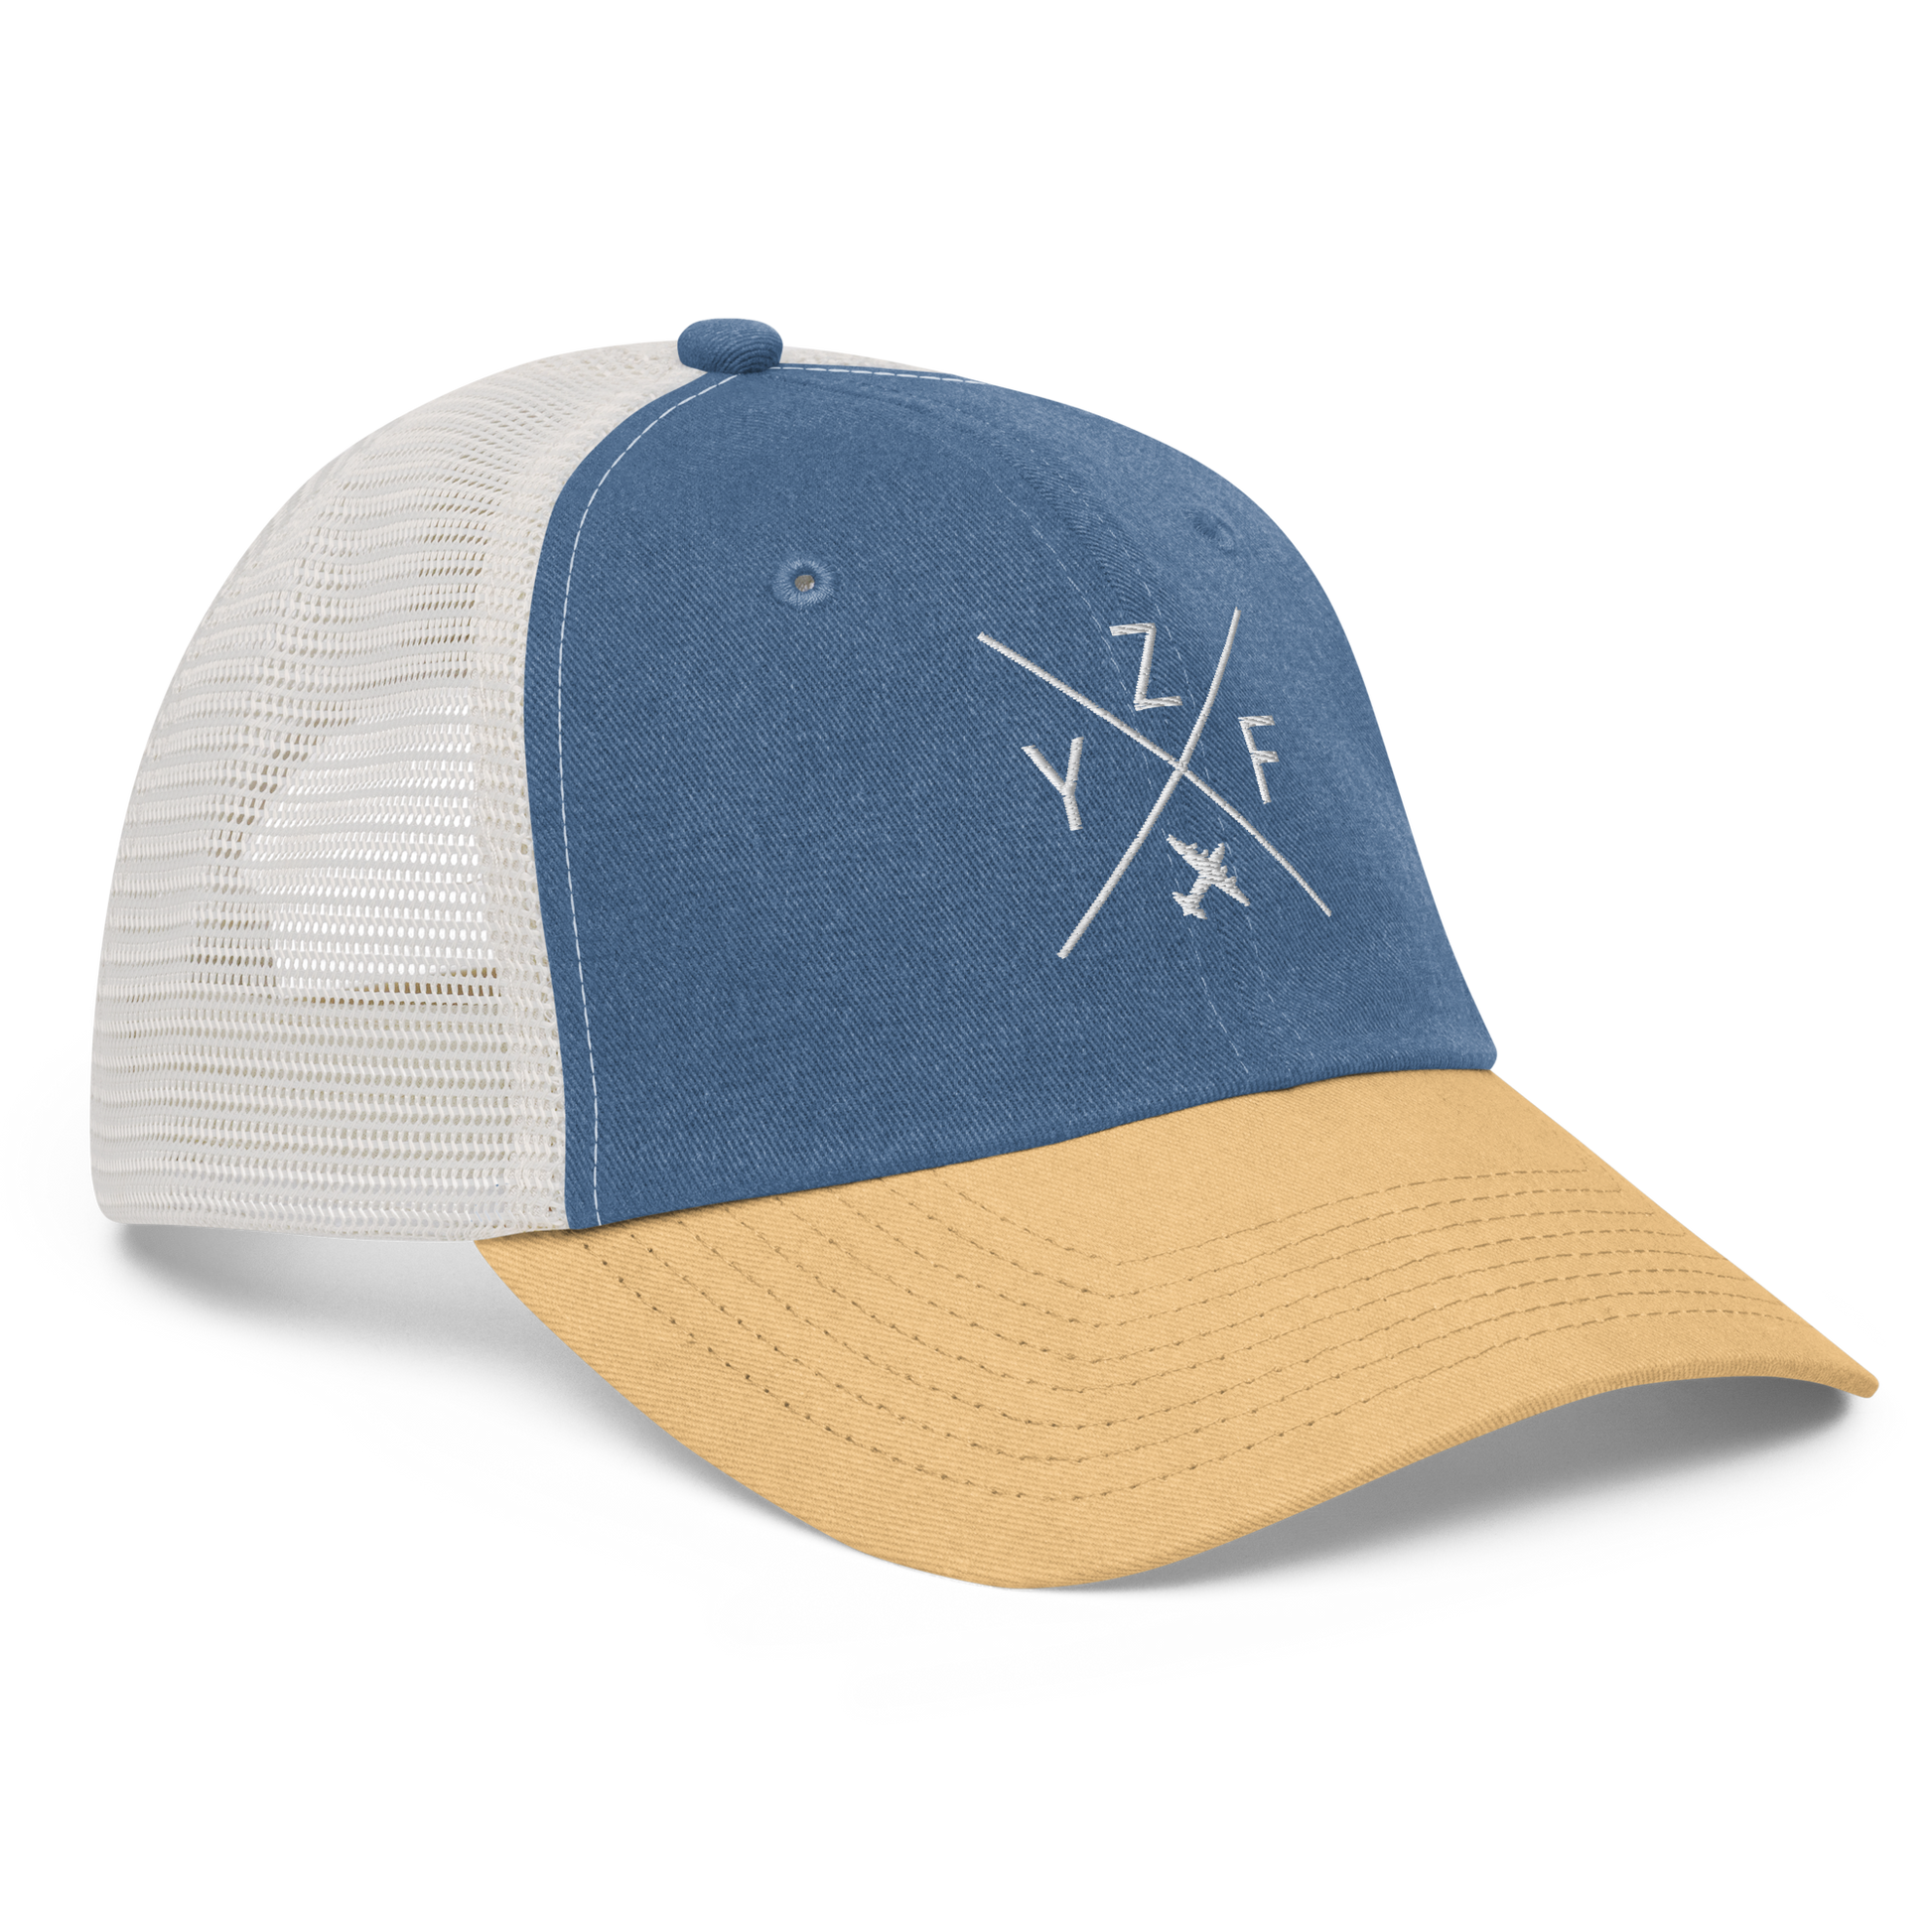 Crossed-X Pigment-Dyed Trucker Cap • YZF Yellowknife • YHM Designs - Image 18